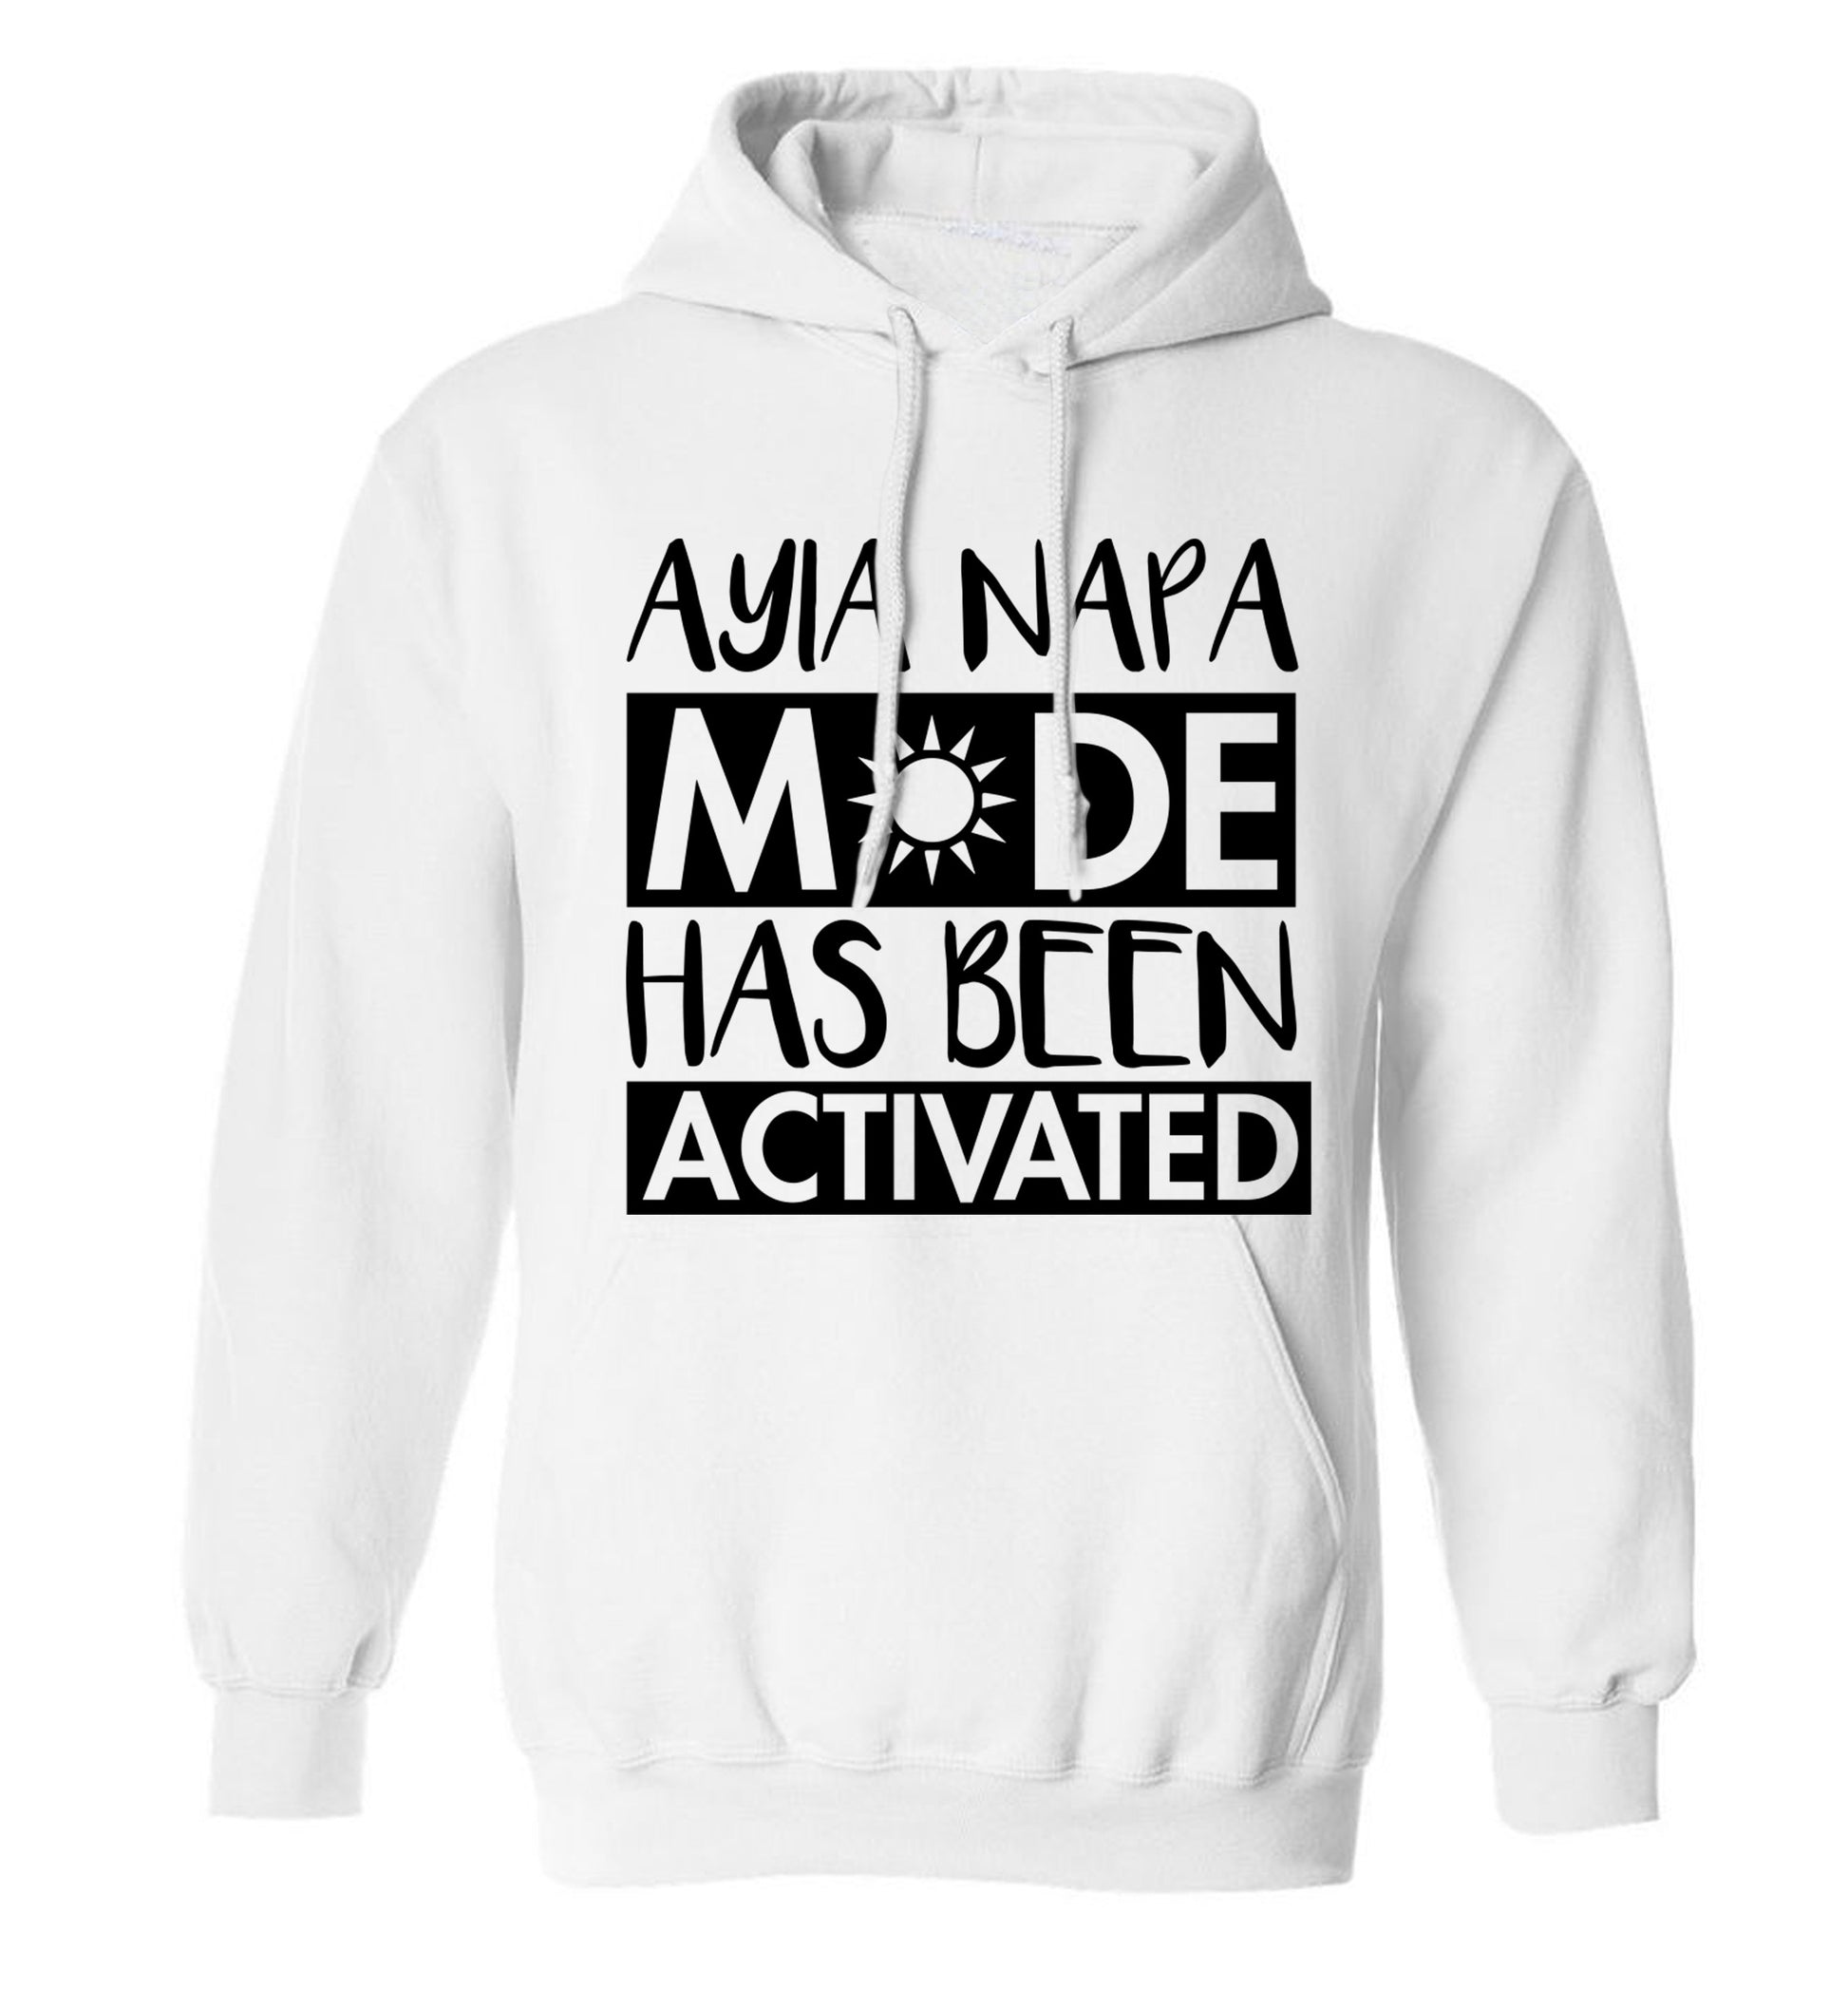 Aiya Napa mode has been activated adults unisex white hoodie 2XL